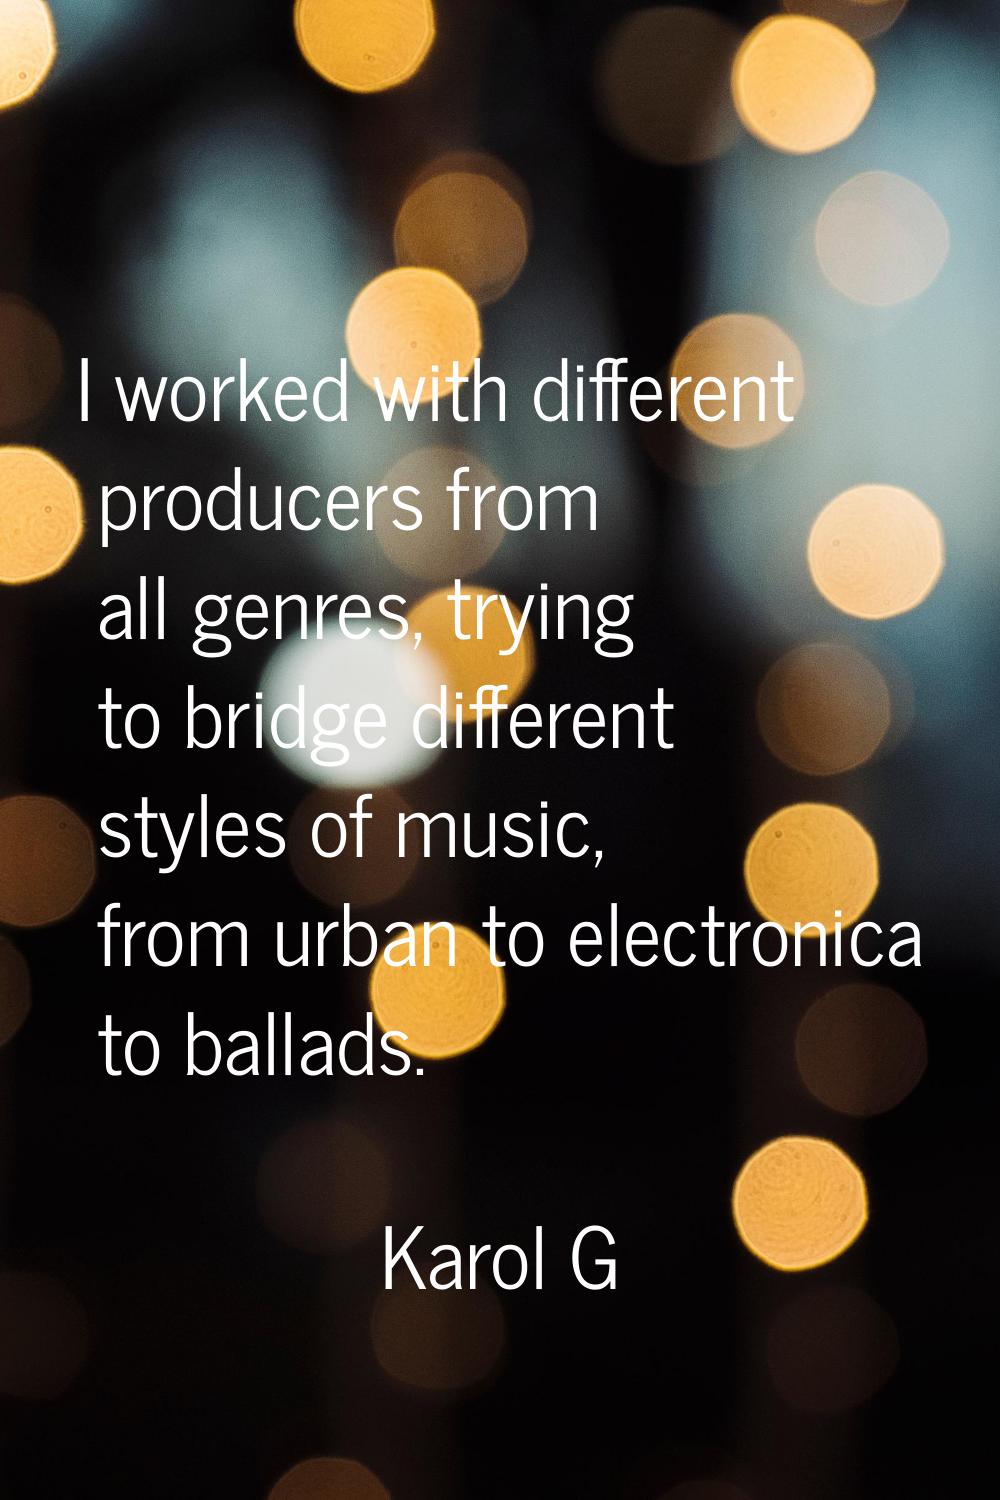 I worked with different producers from all genres, trying to bridge different styles of music, from